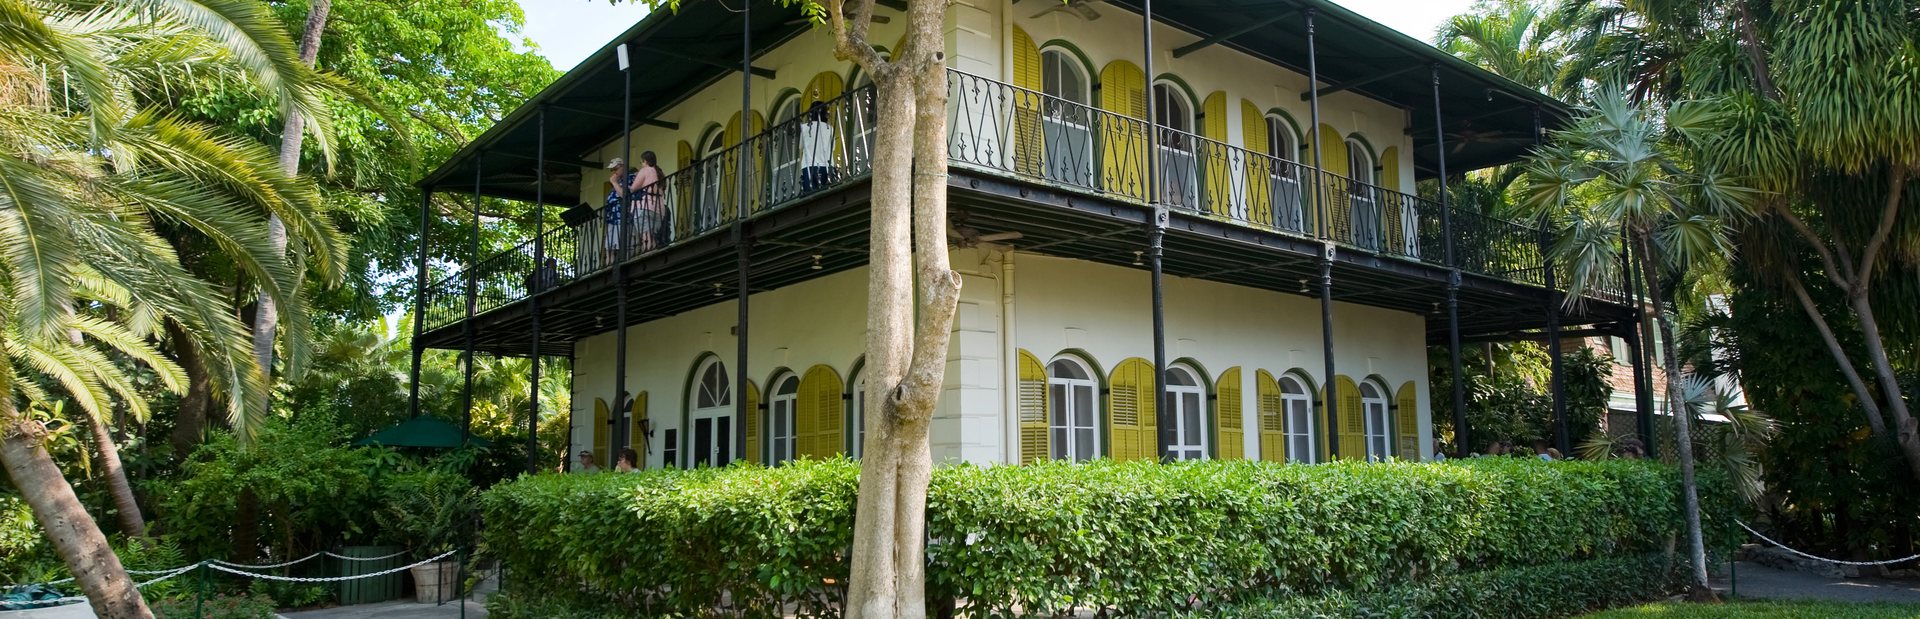 The Hemingway Home and Museum Image 1